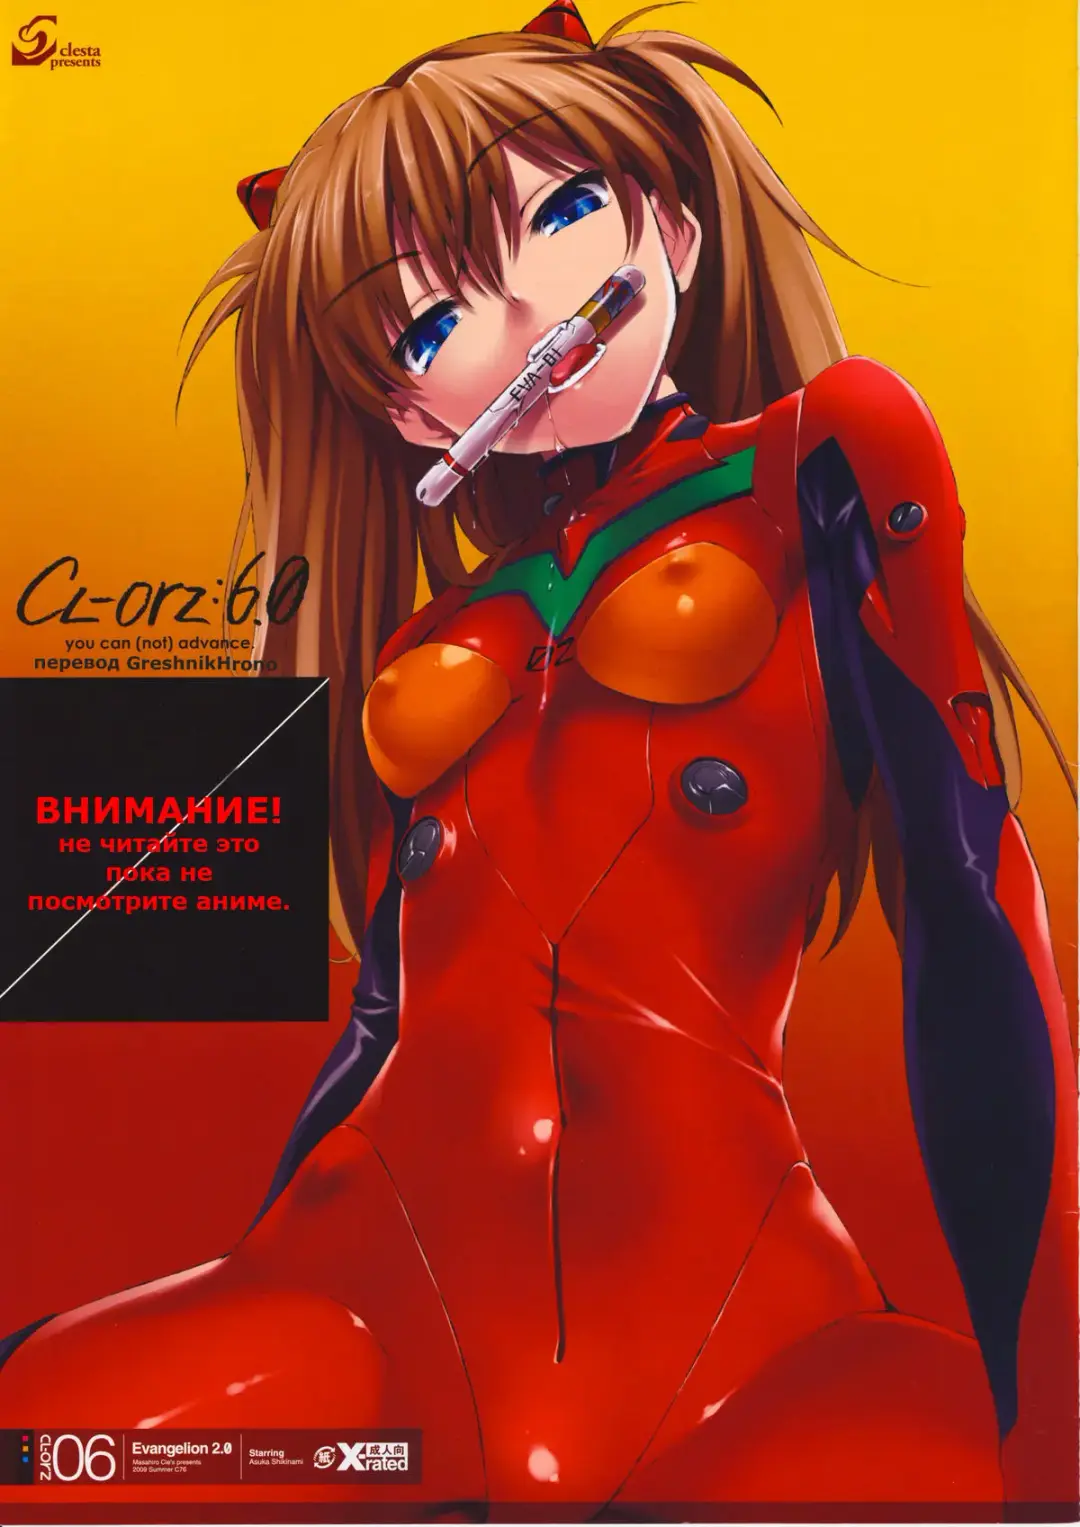 Read [Cle Masahiro] CL-orz 6.0 you can (not) advance. (decensored) - Fhentai.net